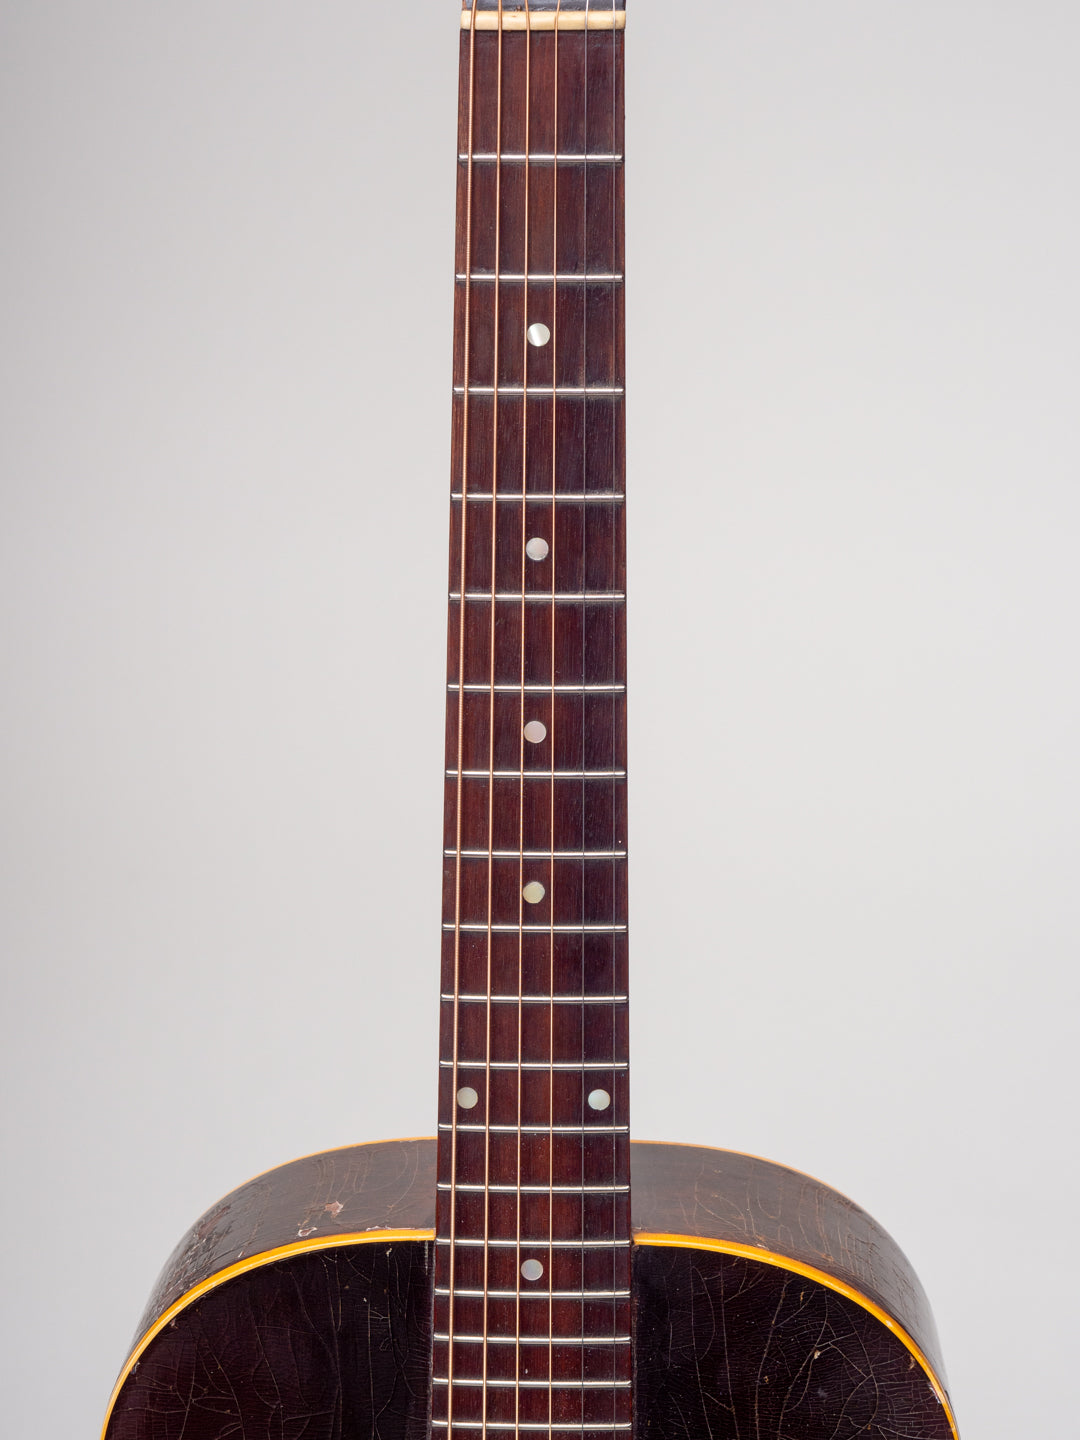 1944 Gibson L-0